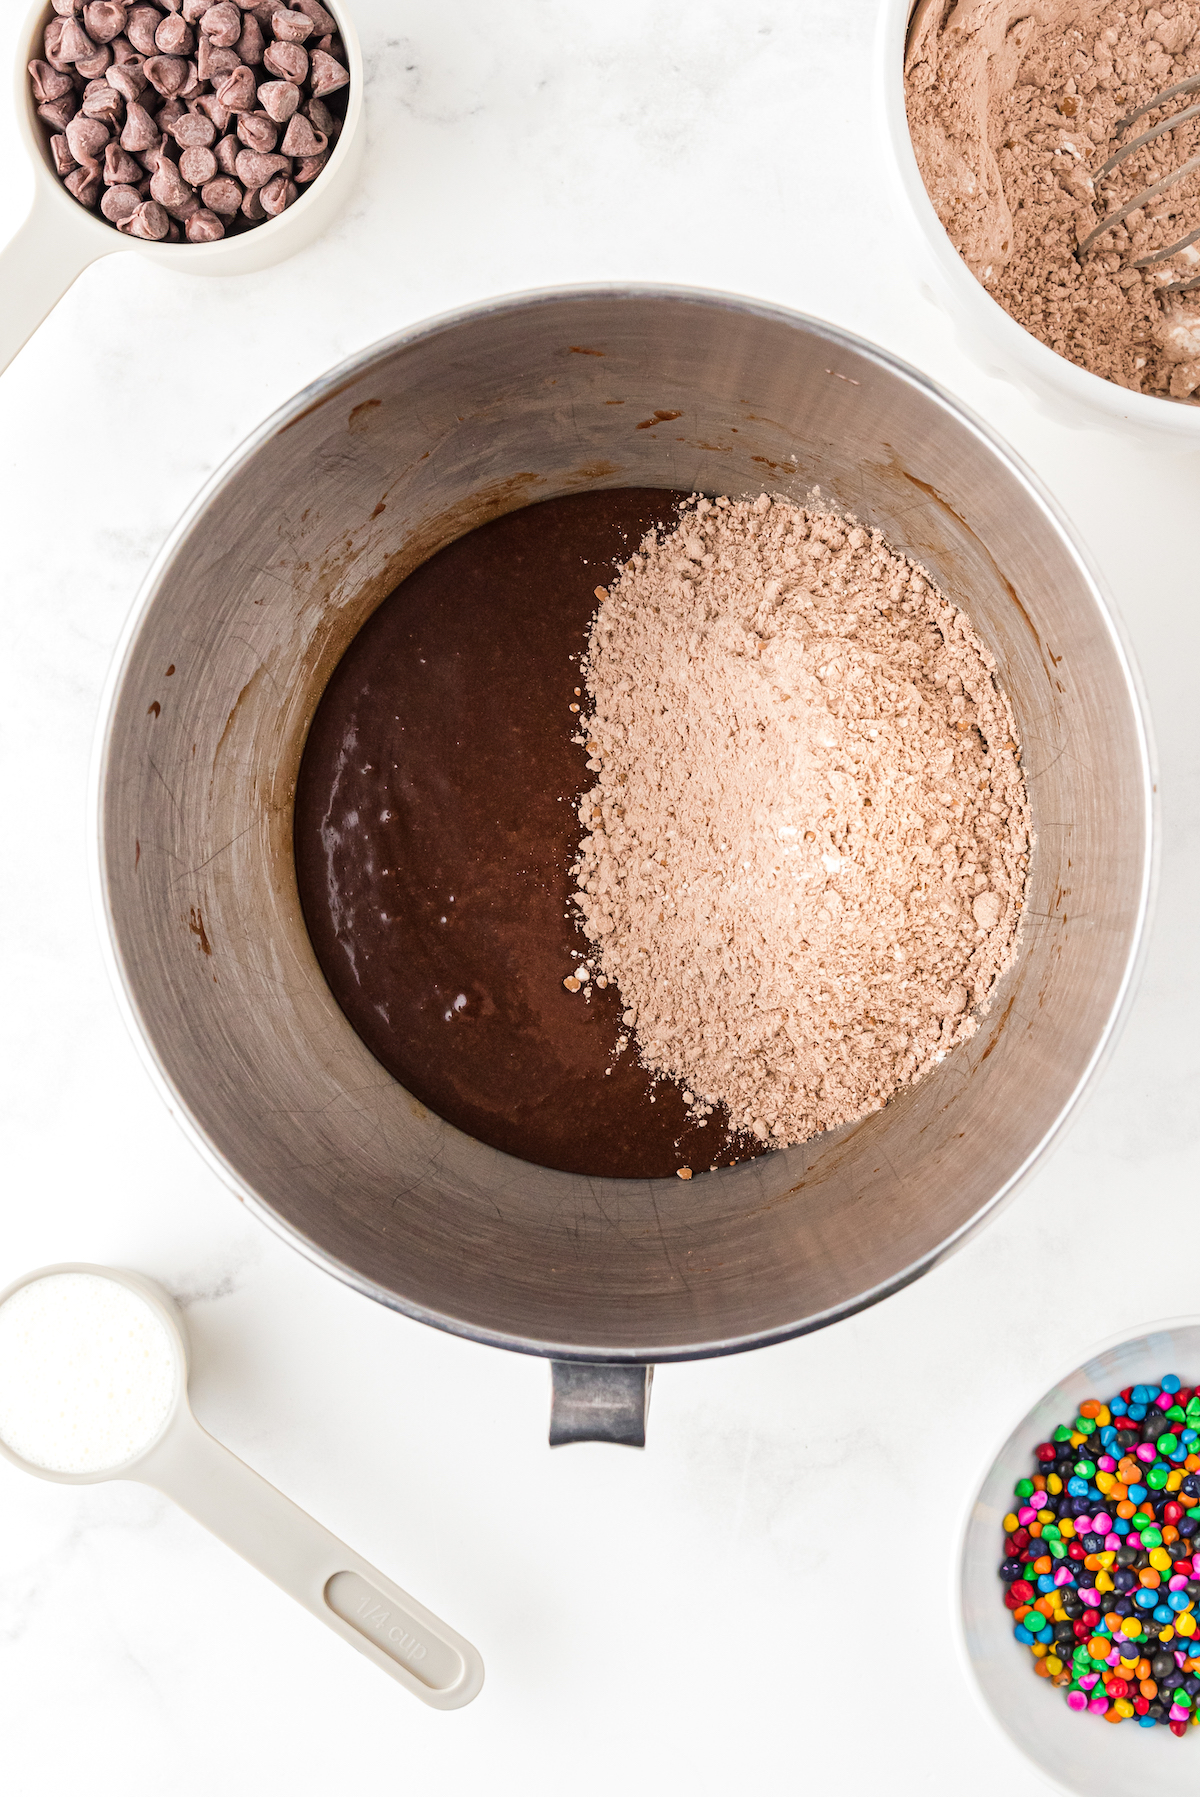 Chocolate batter with dry ingredients being mixed in.